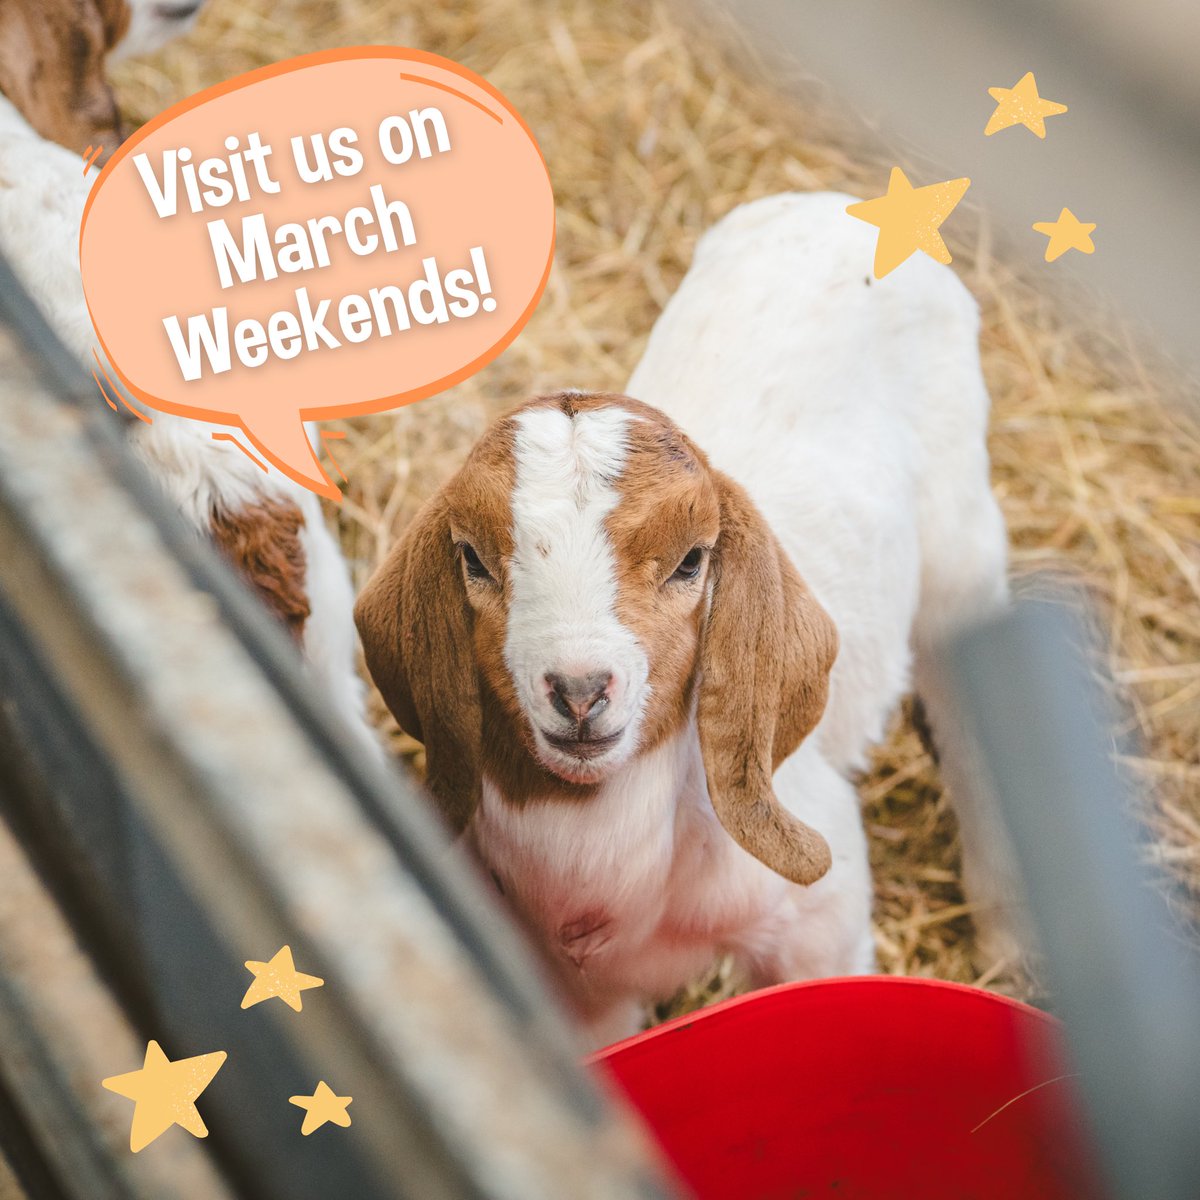 Did you know we’re open for MARCH WEEKENDS? 🤩 We’ll be open for all our usual farm fun PLUS lamb feeding and lambing live will also be available for these weekends!! 🐑✨ Get booking now! 👉 adventurefarm.co.uk